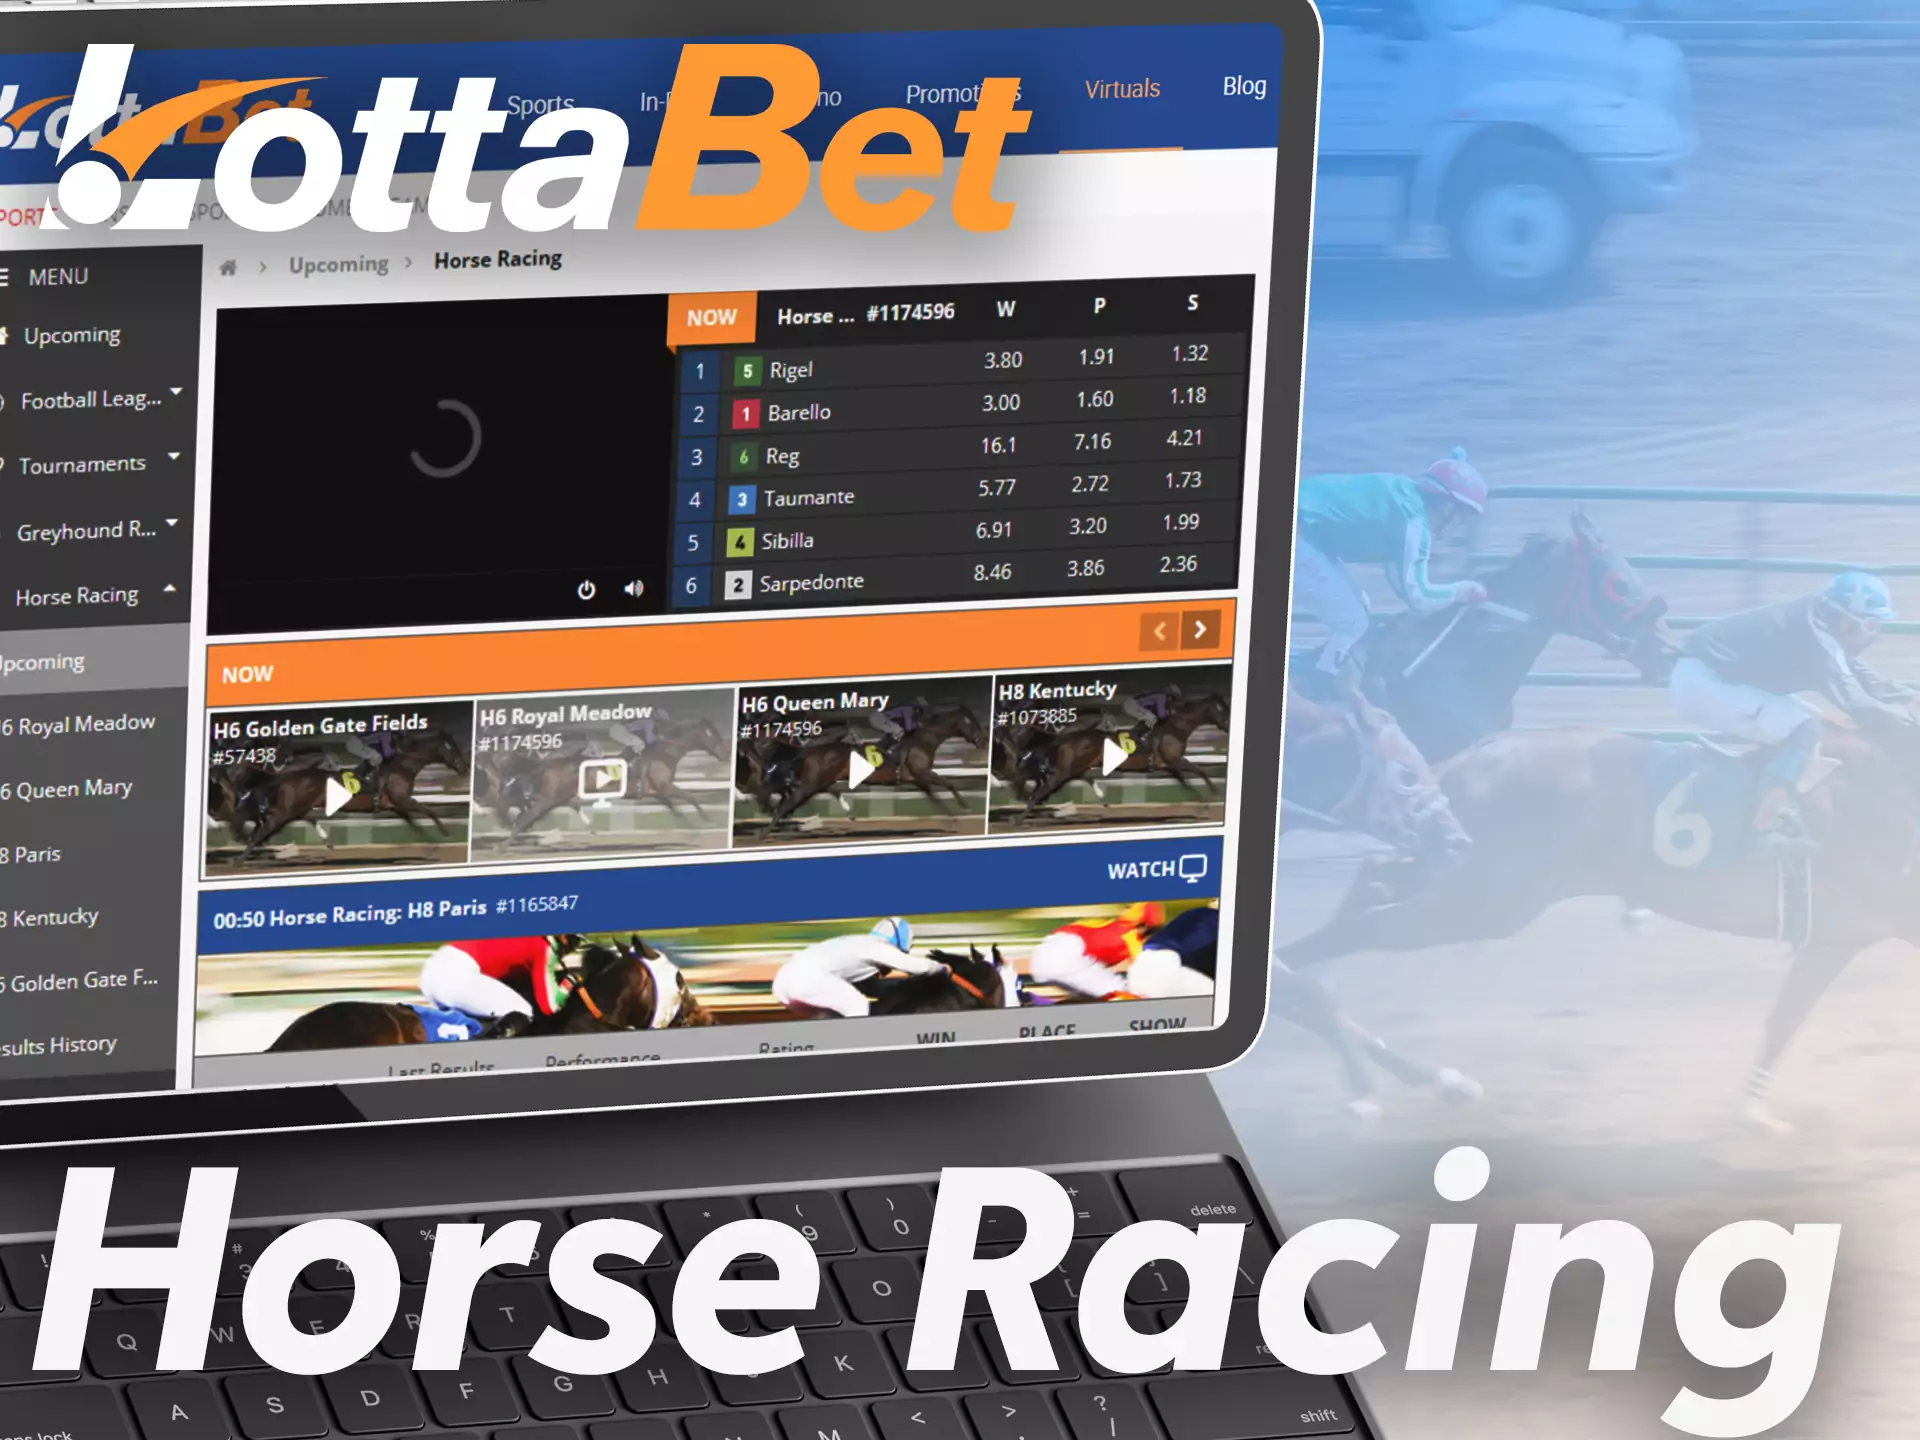 You can bet on horse racing if you have a Lottabet account.